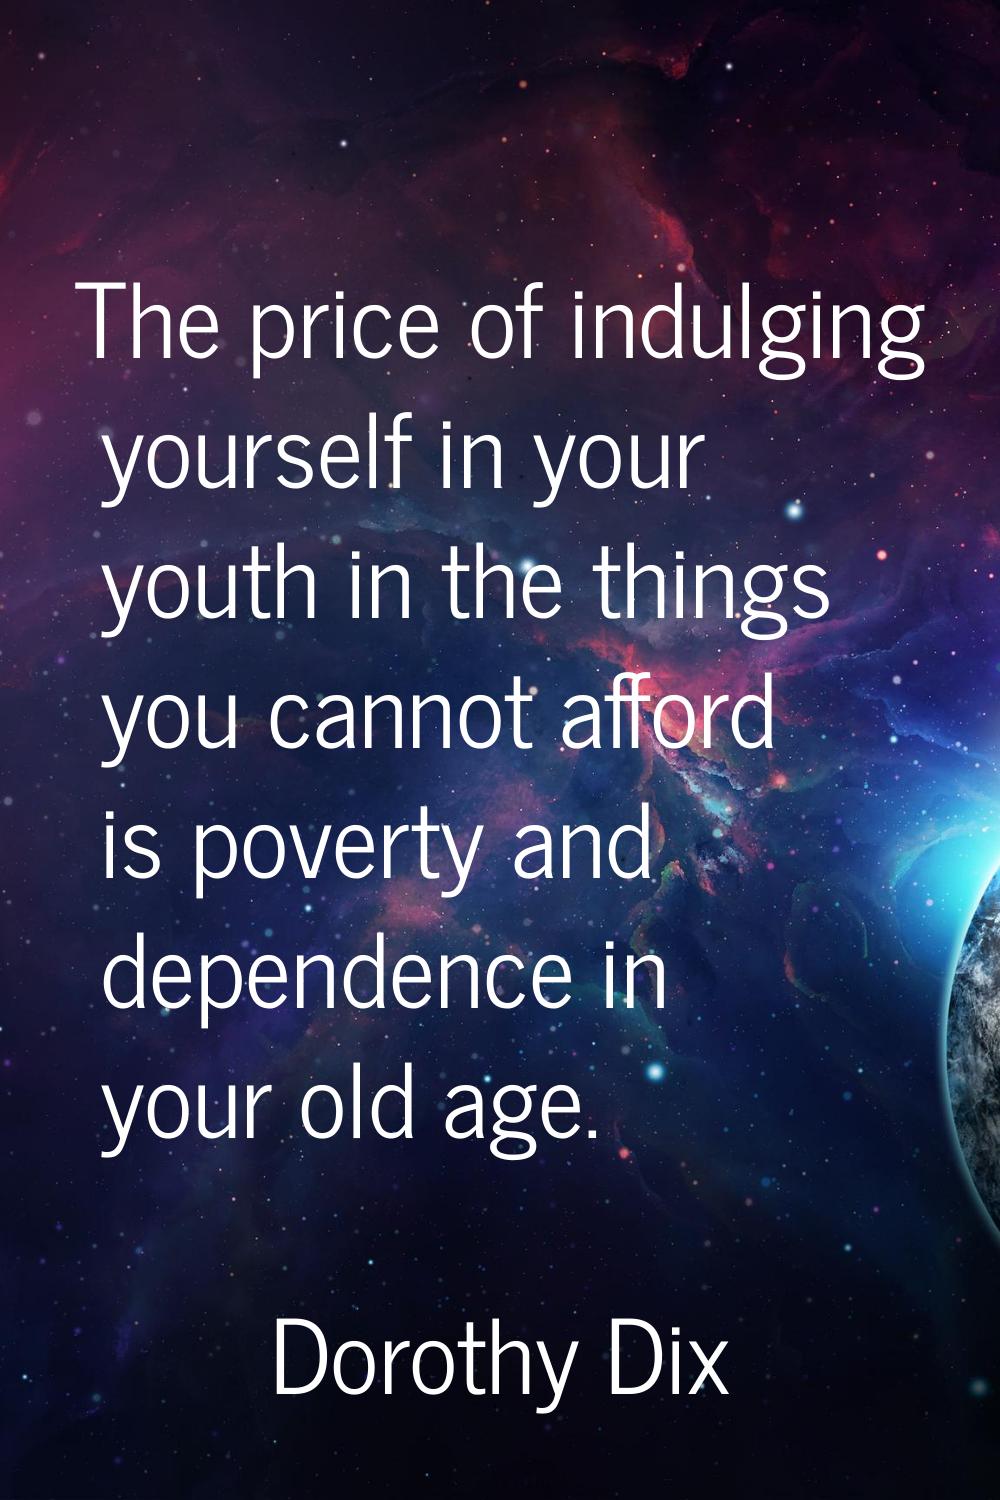 The price of indulging yourself in your youth in the things you cannot afford is poverty and depend